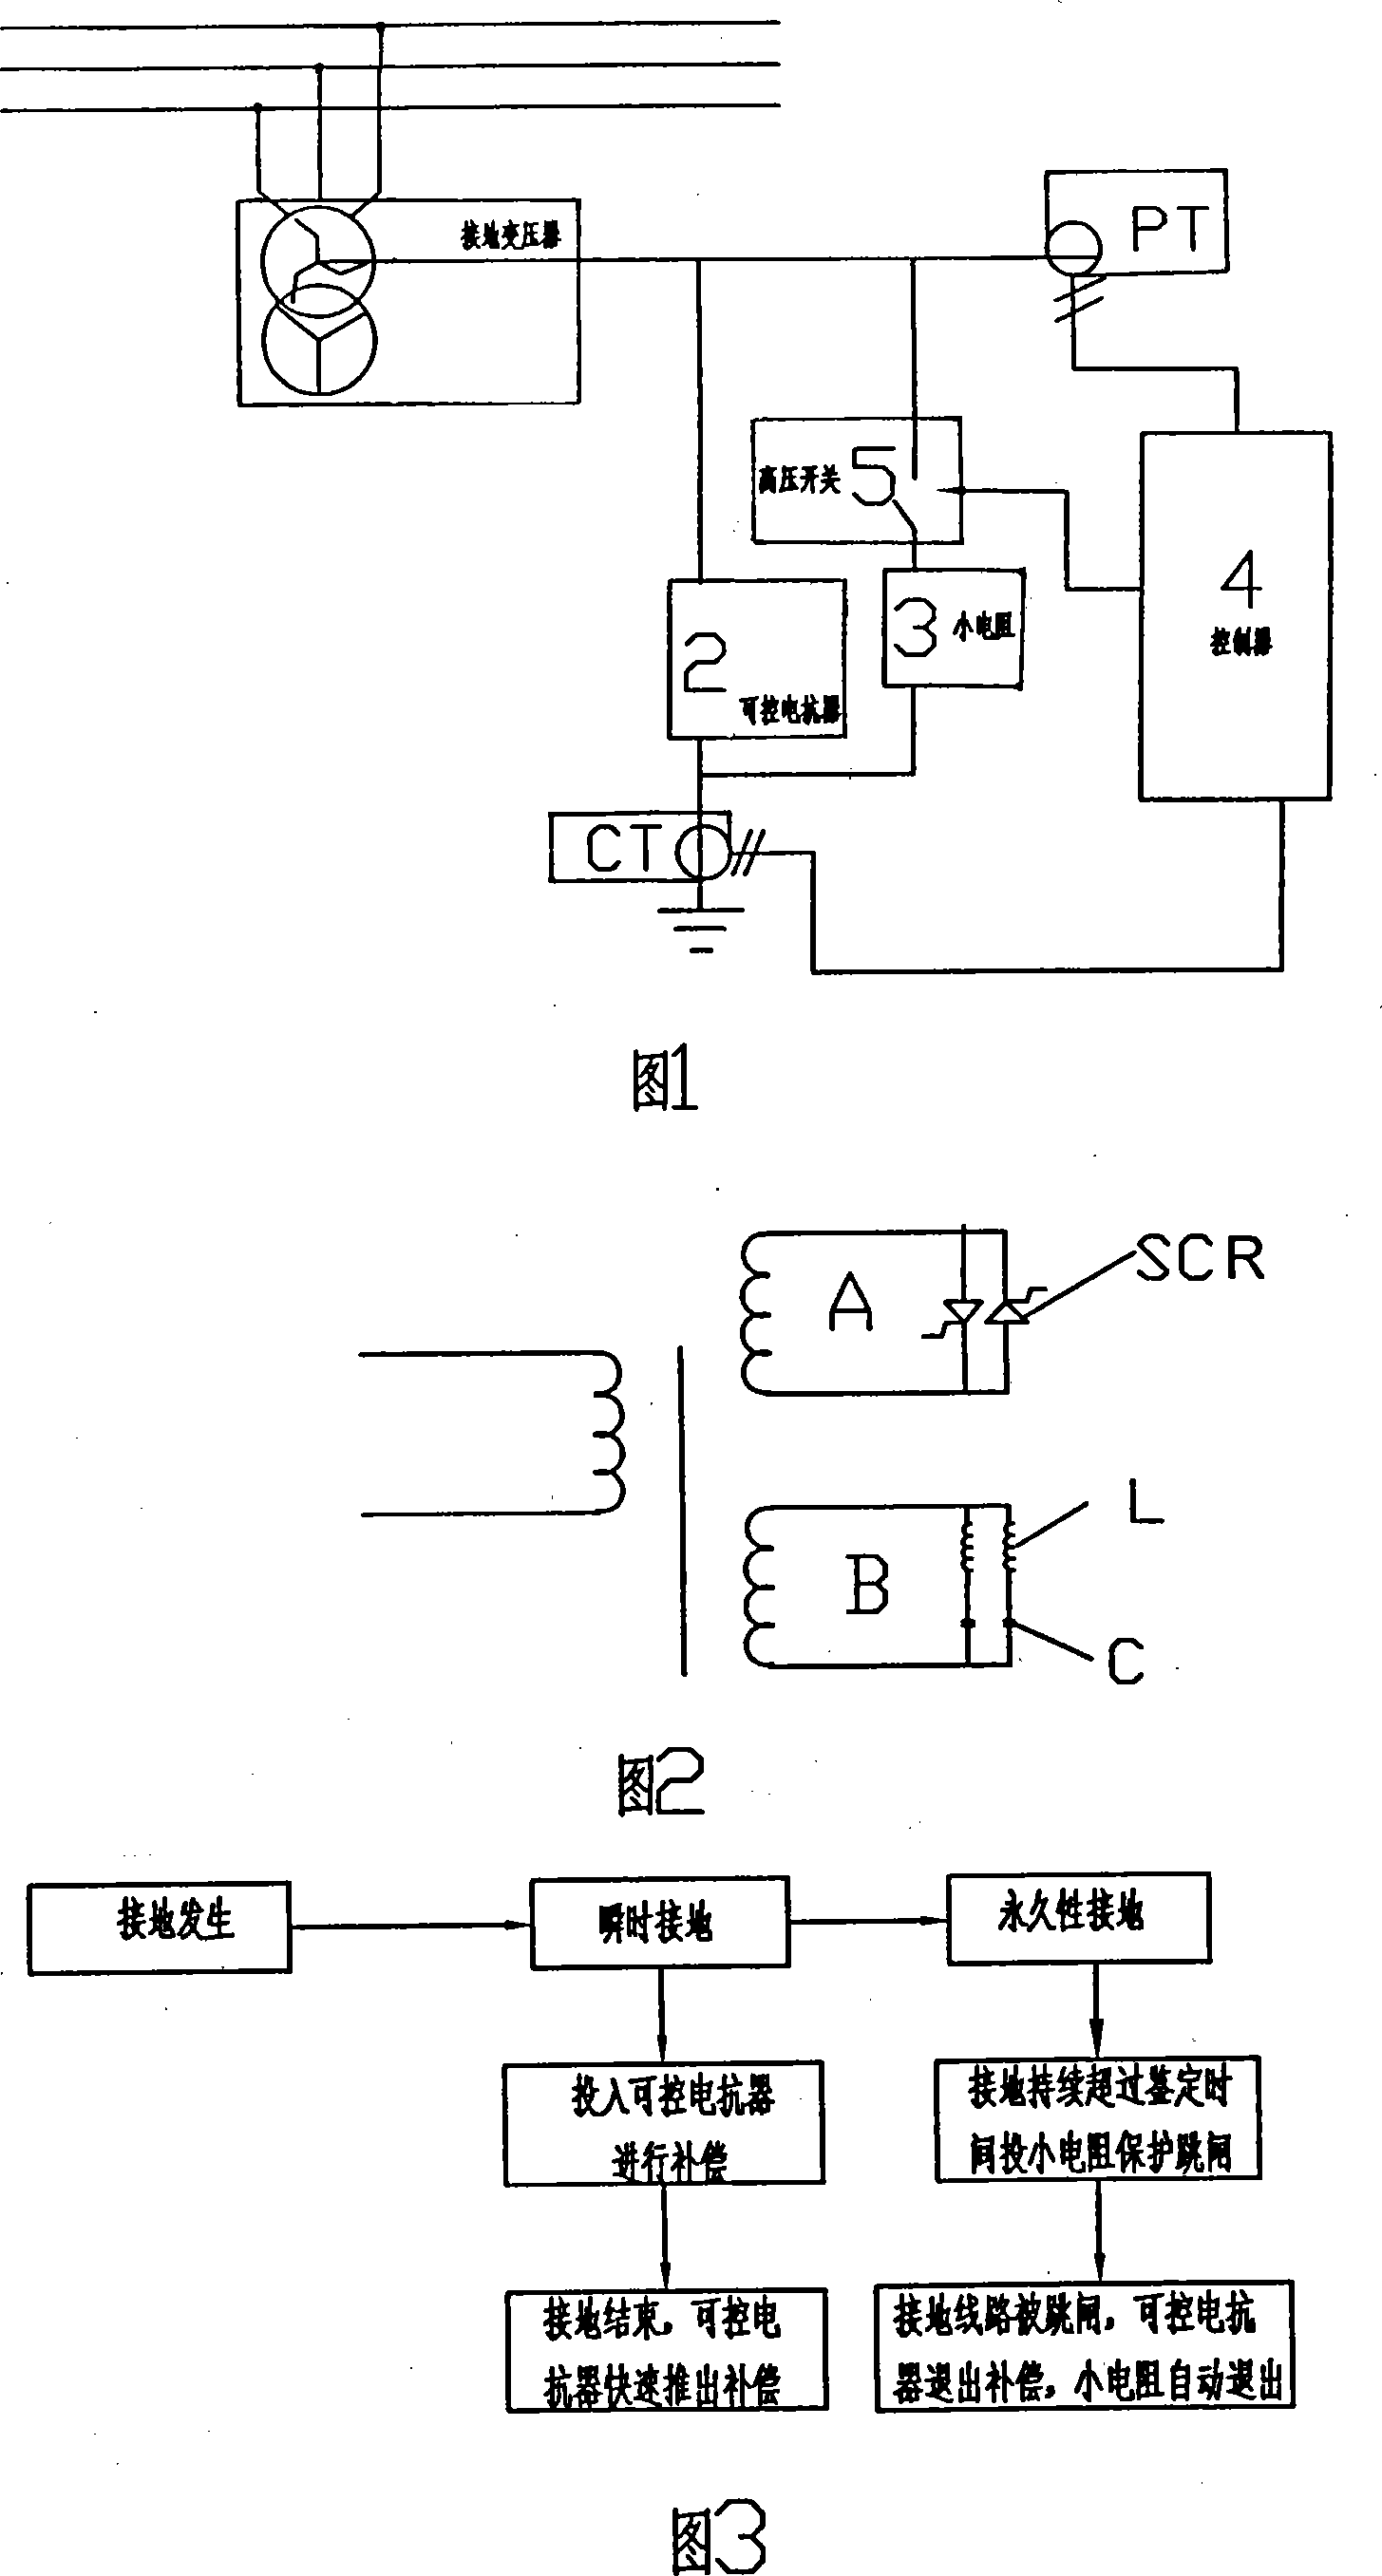 Power network controlled reactance and small resistor combination type earthing device